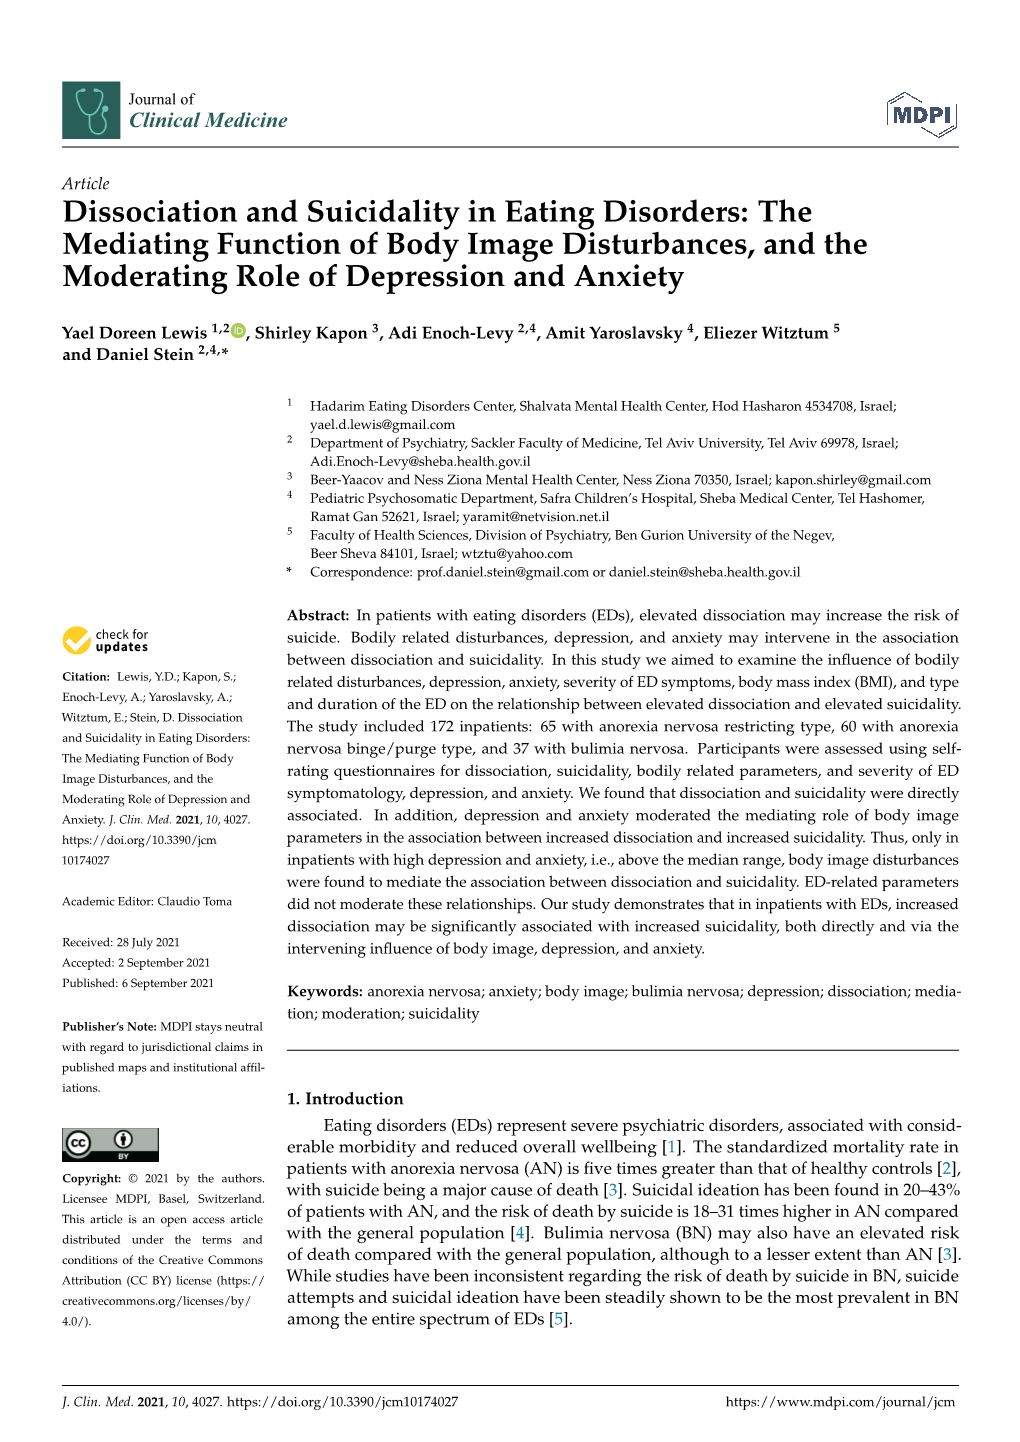 Dissociation and Suicidality in Eating Disorders: the Mediating Function of Body Image Disturbances, and the Moderating Role of Depression and Anxiety